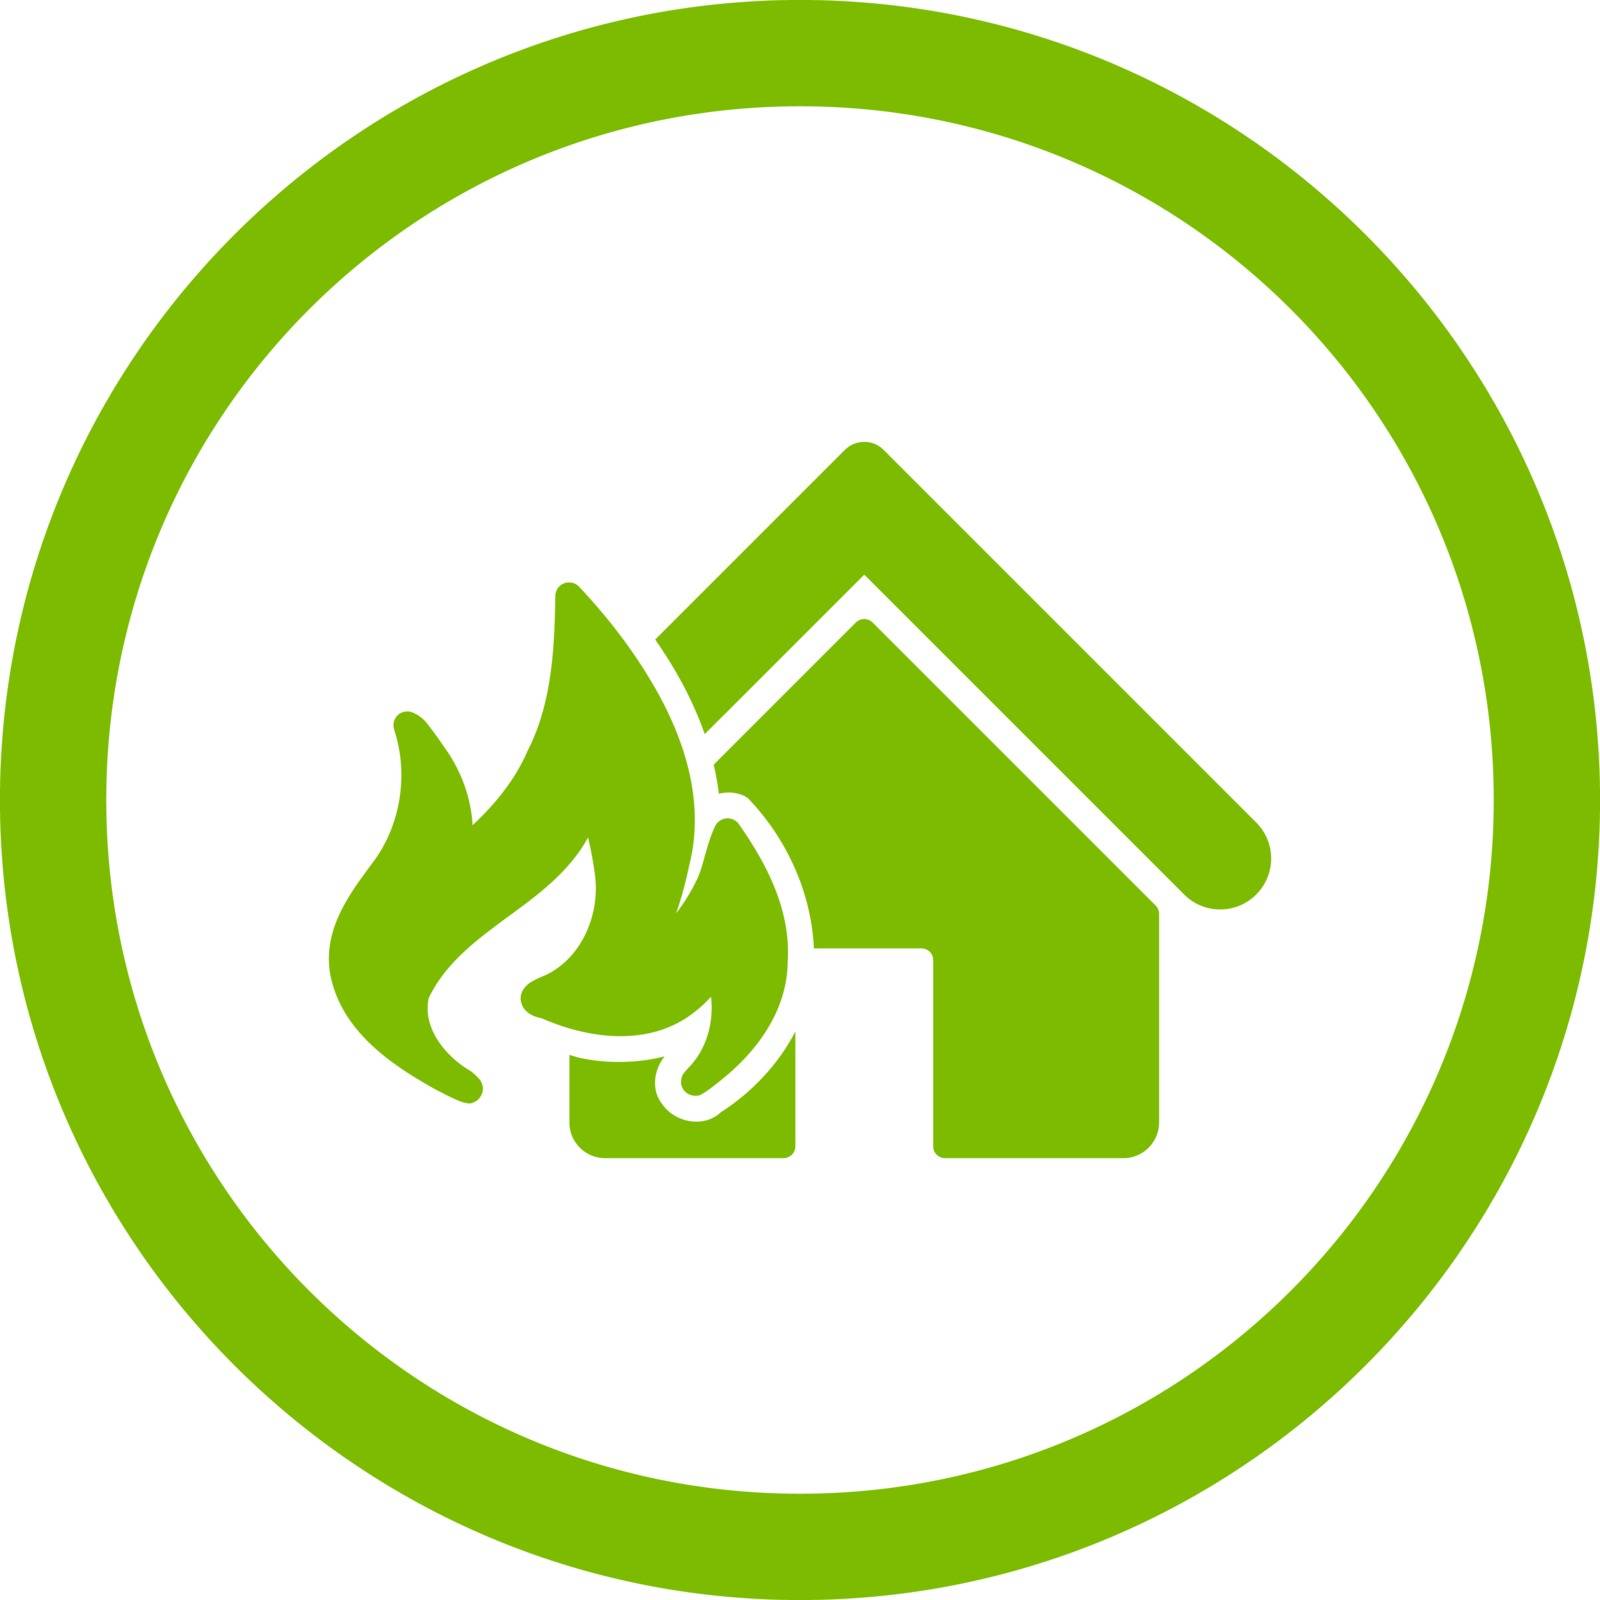 Fire Damage vector icon. This flat rounded symbol uses eco green color and isolated on a white background.